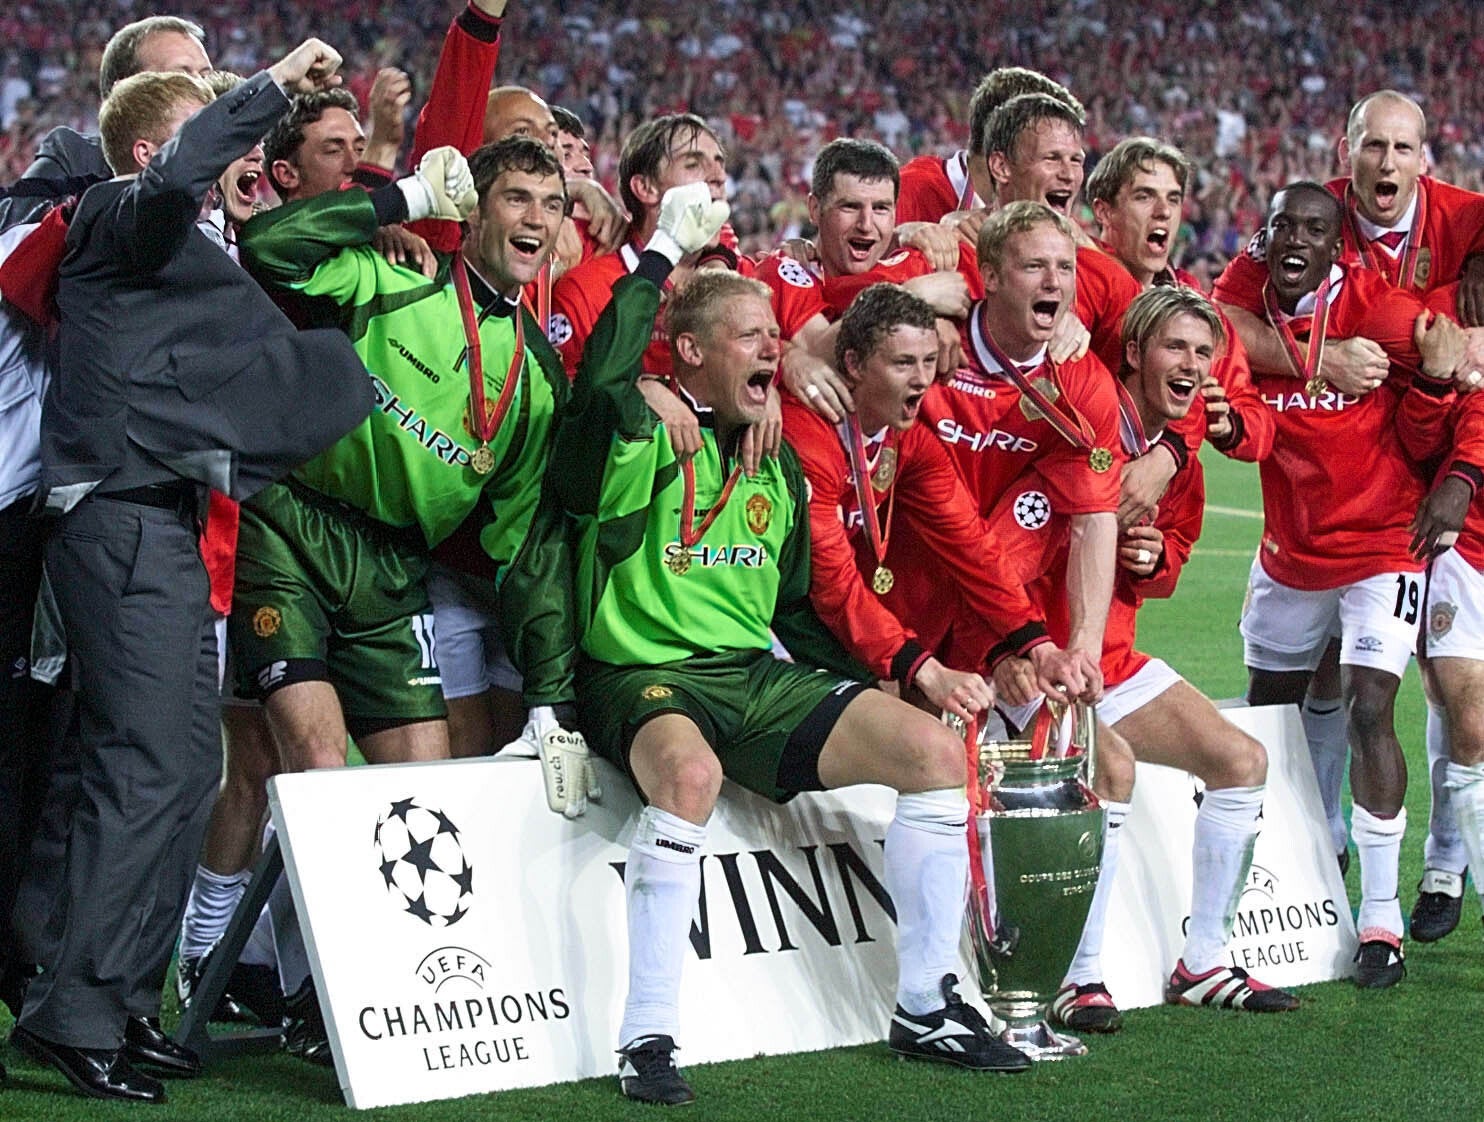 Manchester United won the Champions League in dramatic circumstances (Phil Noble/PA)